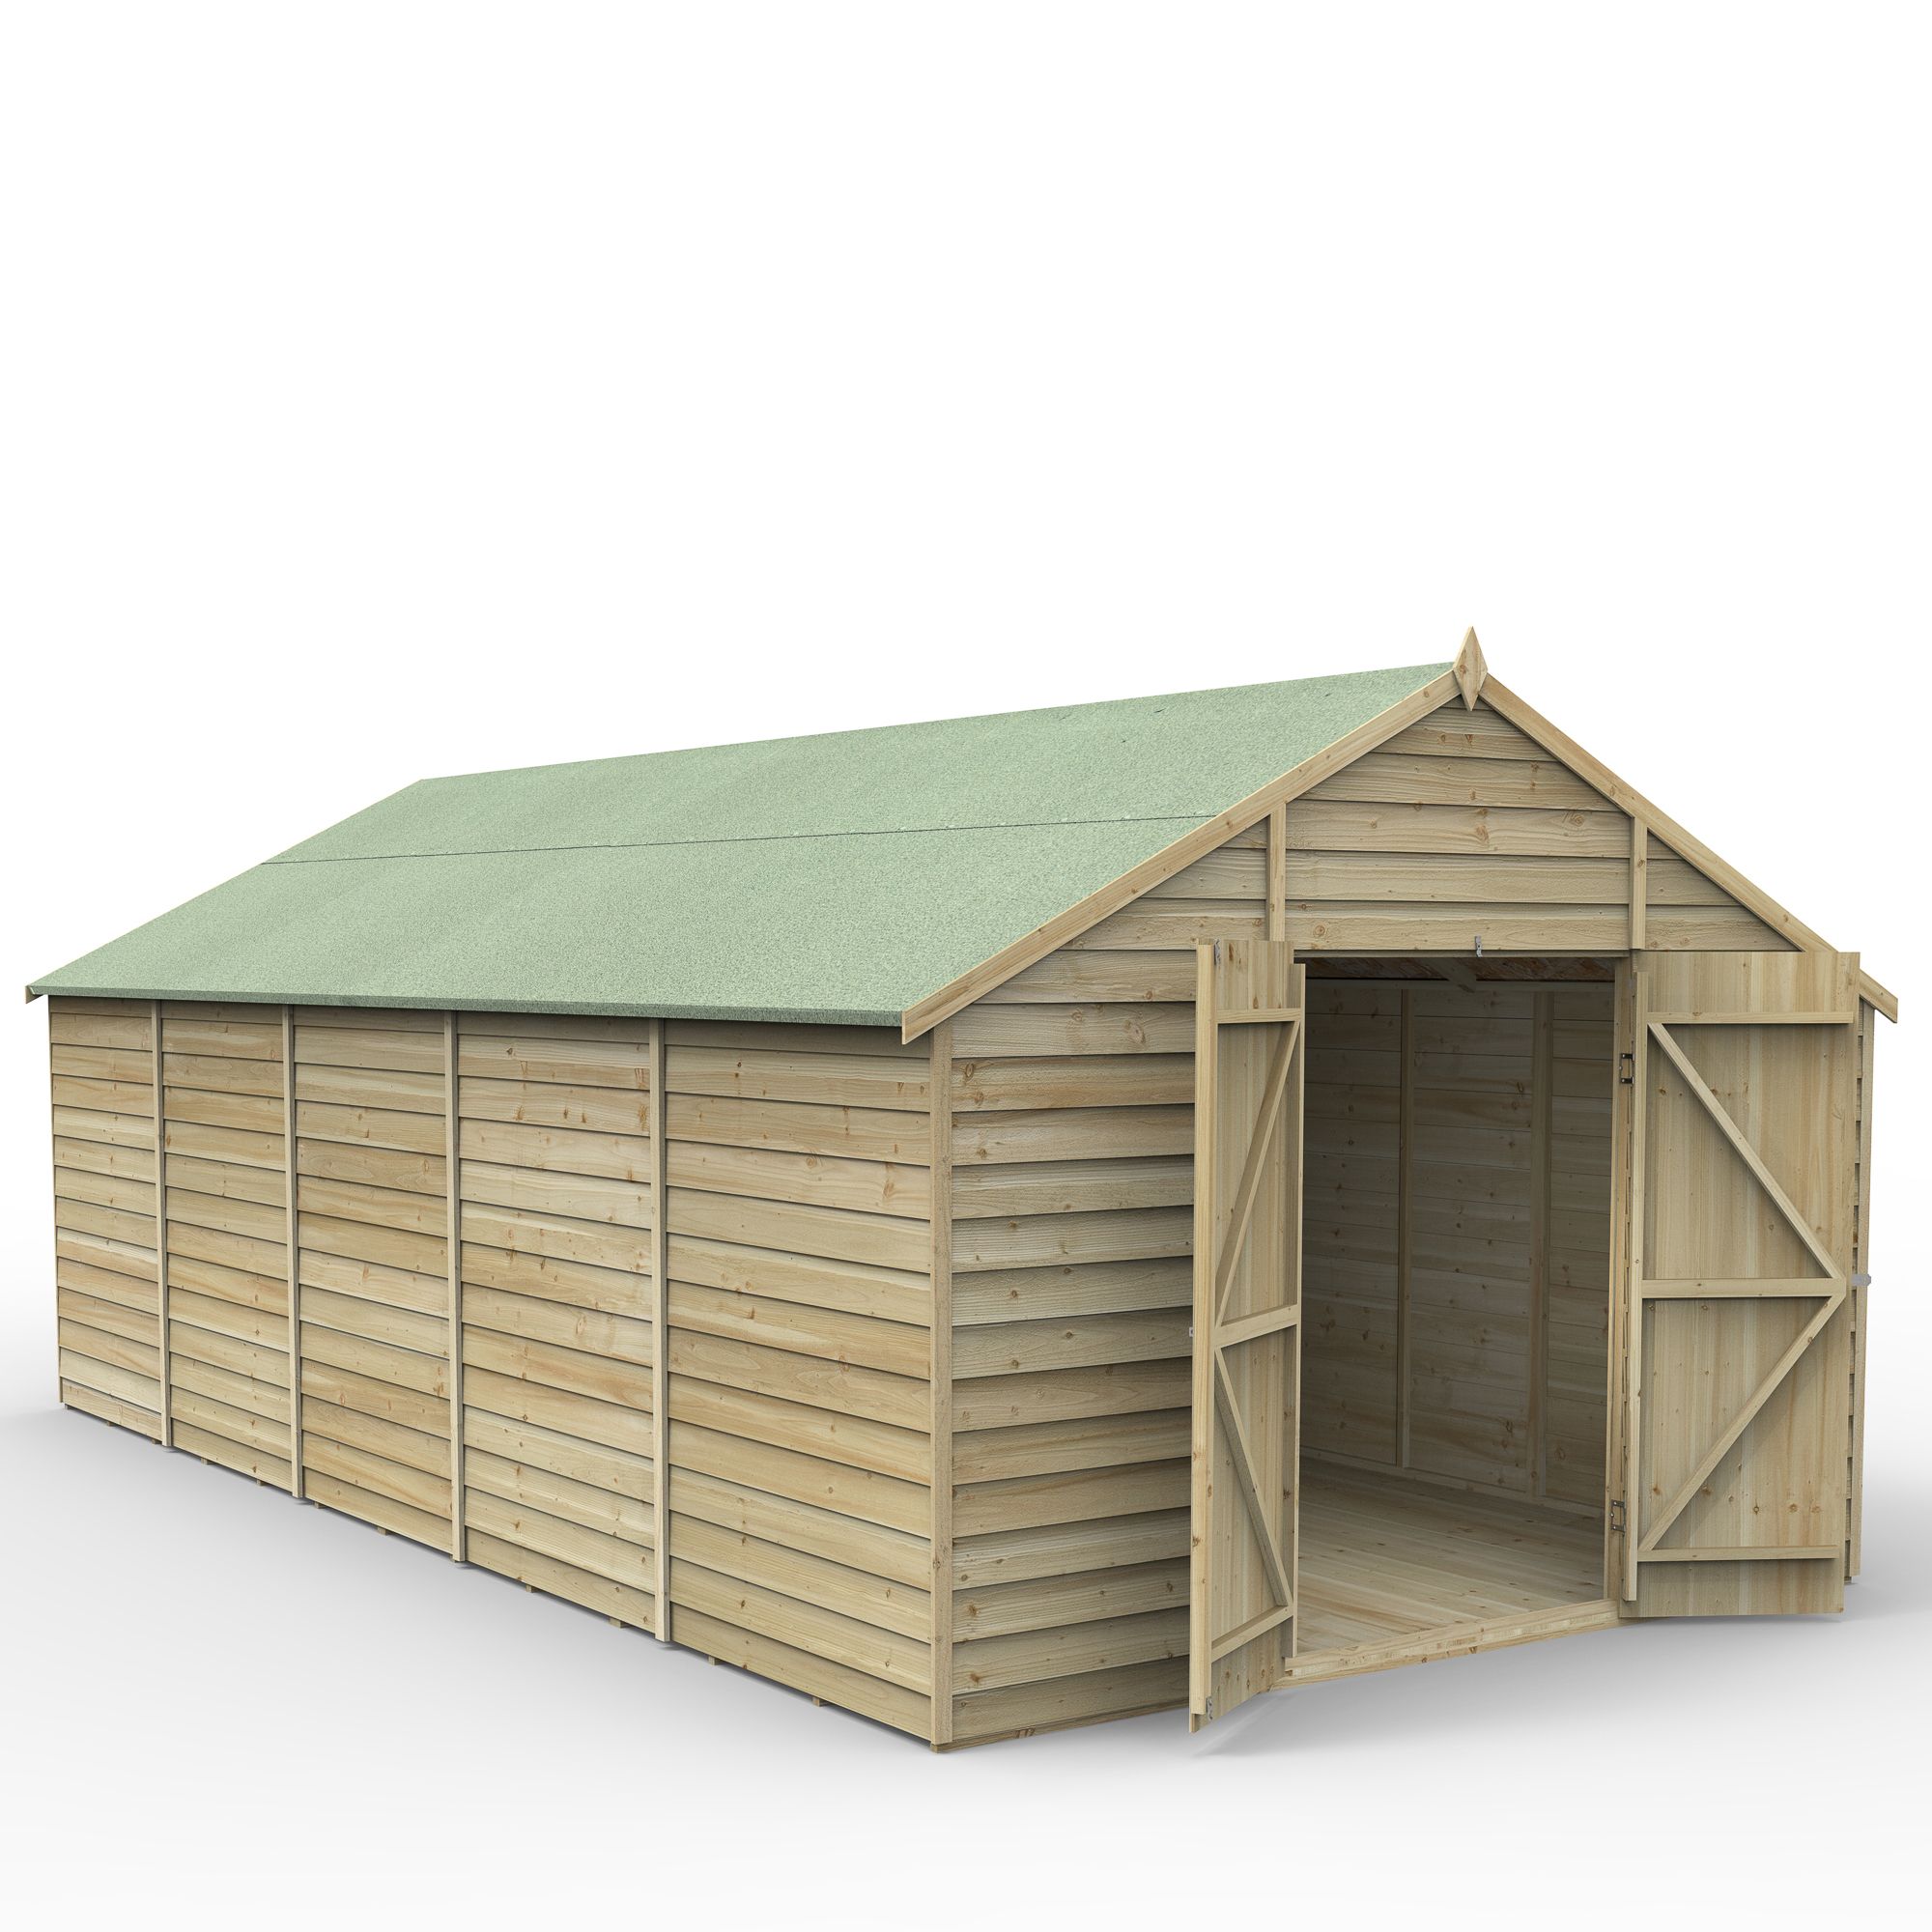 Forest Garden 10X20 Apex Pressure Treated Overlap Wooden Shed With Floor